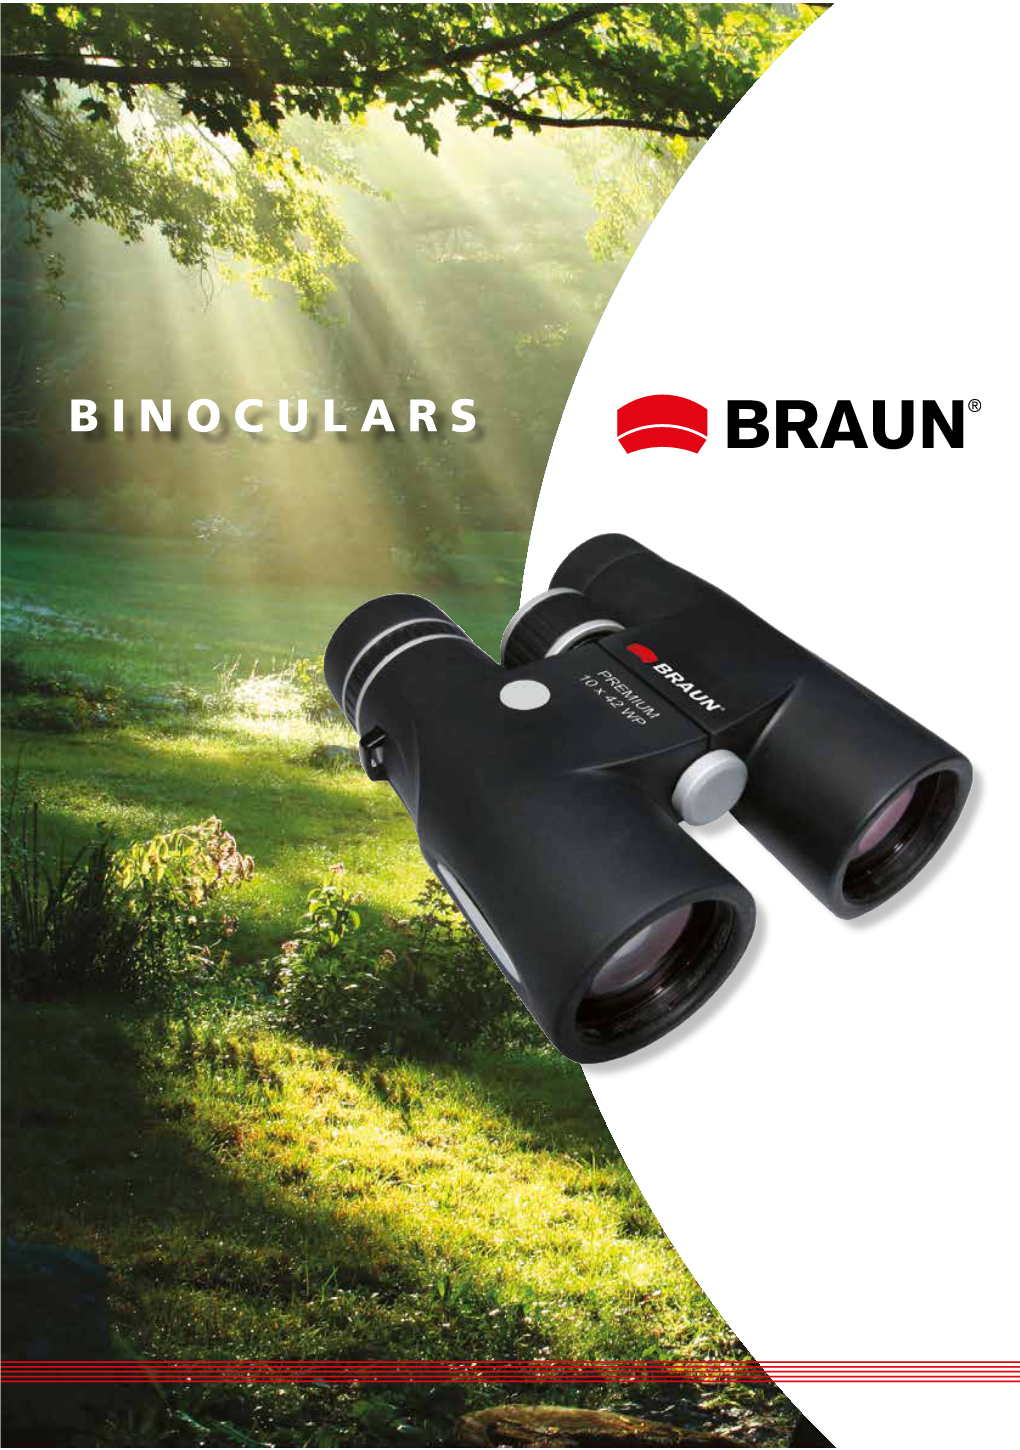 BINOCULARS the BRAUN Premium Binoculars of the ED Series Offer Your Perfect View Even at Dusk